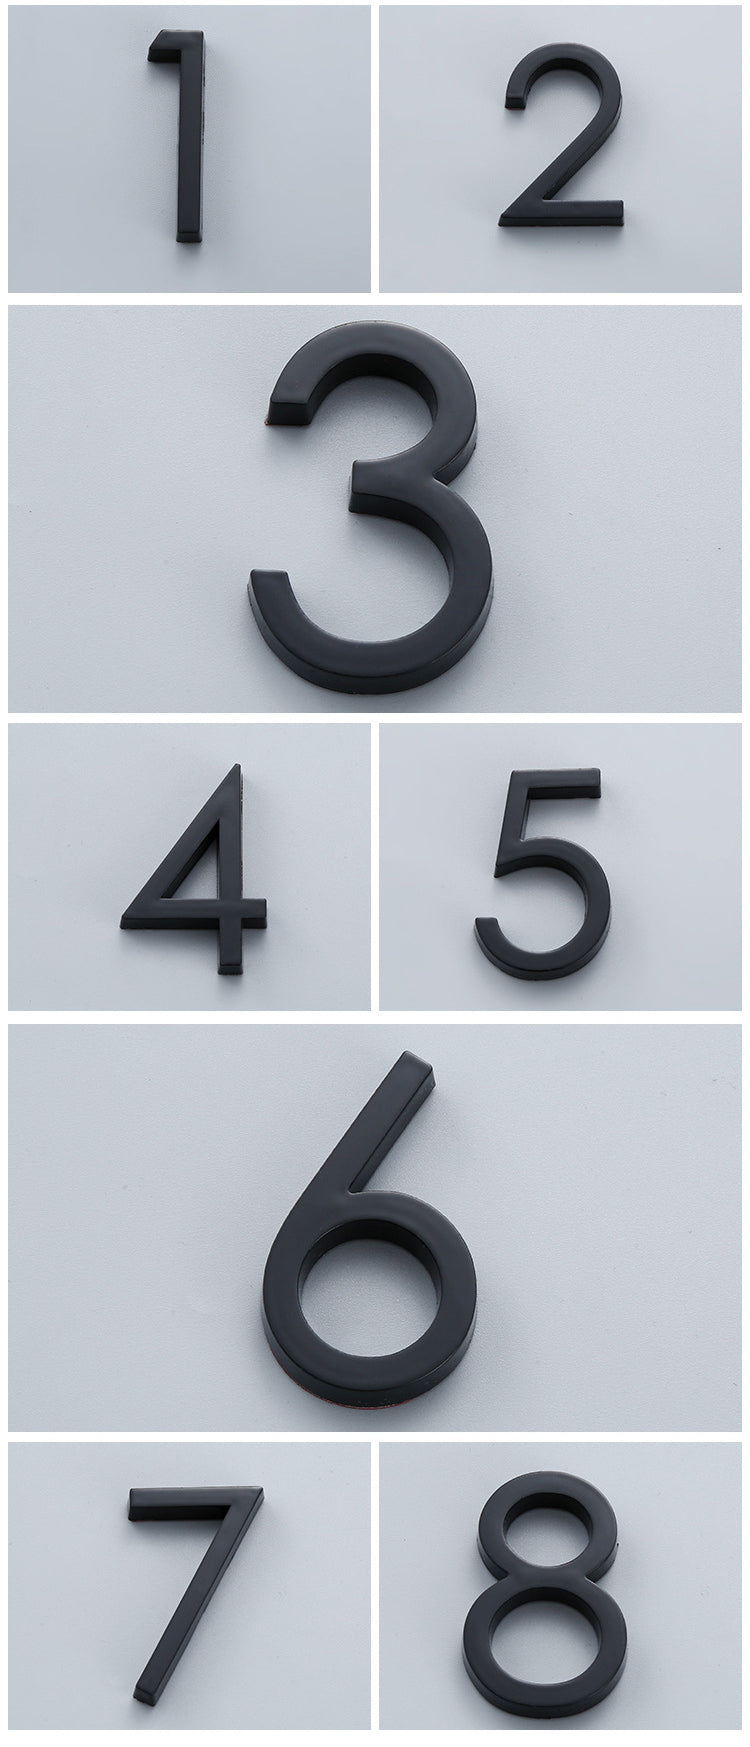 Bright Modern 3D Door Numbers For Hotel Rooms Residential Business Office Signage Self Adhesive Numbers Electroplated Plastic Digits #0-9